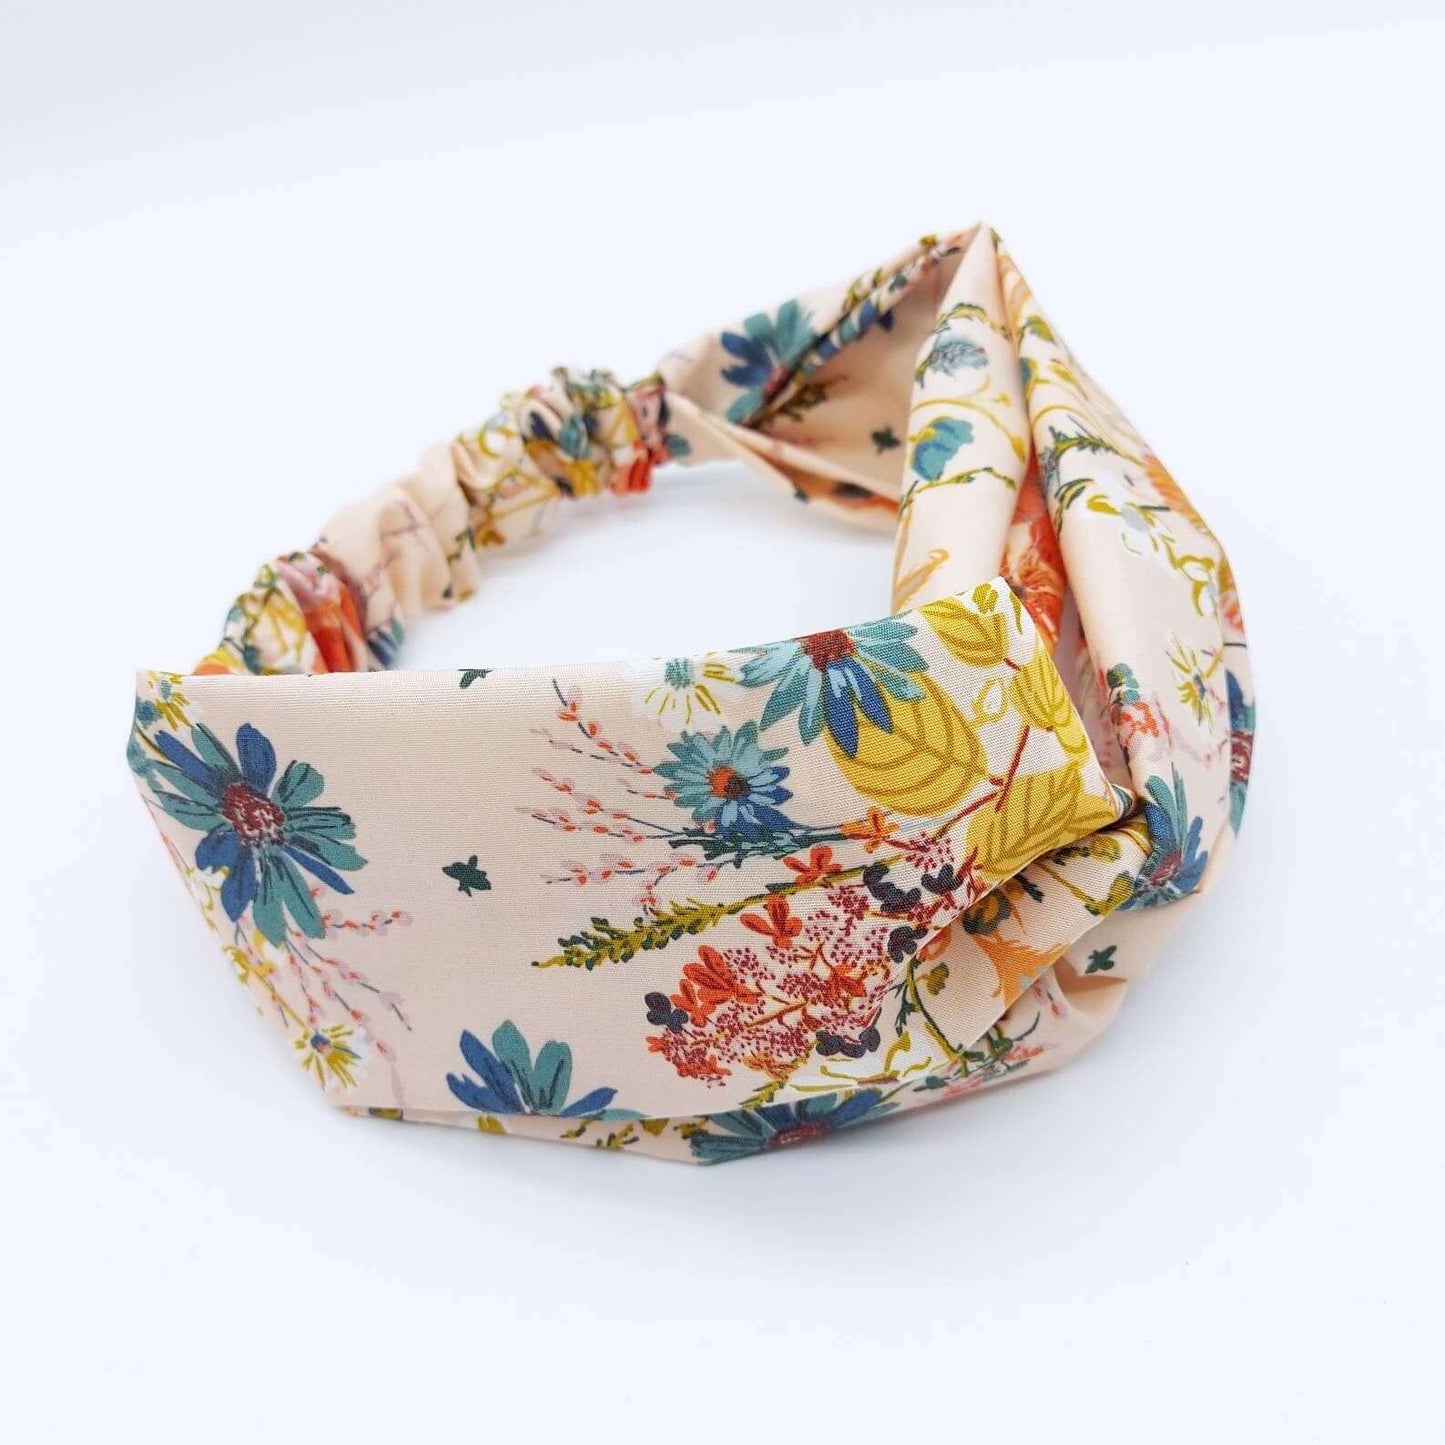 A pretty cream cotton, floral print turban twist headband with an elasticated panel at the back.